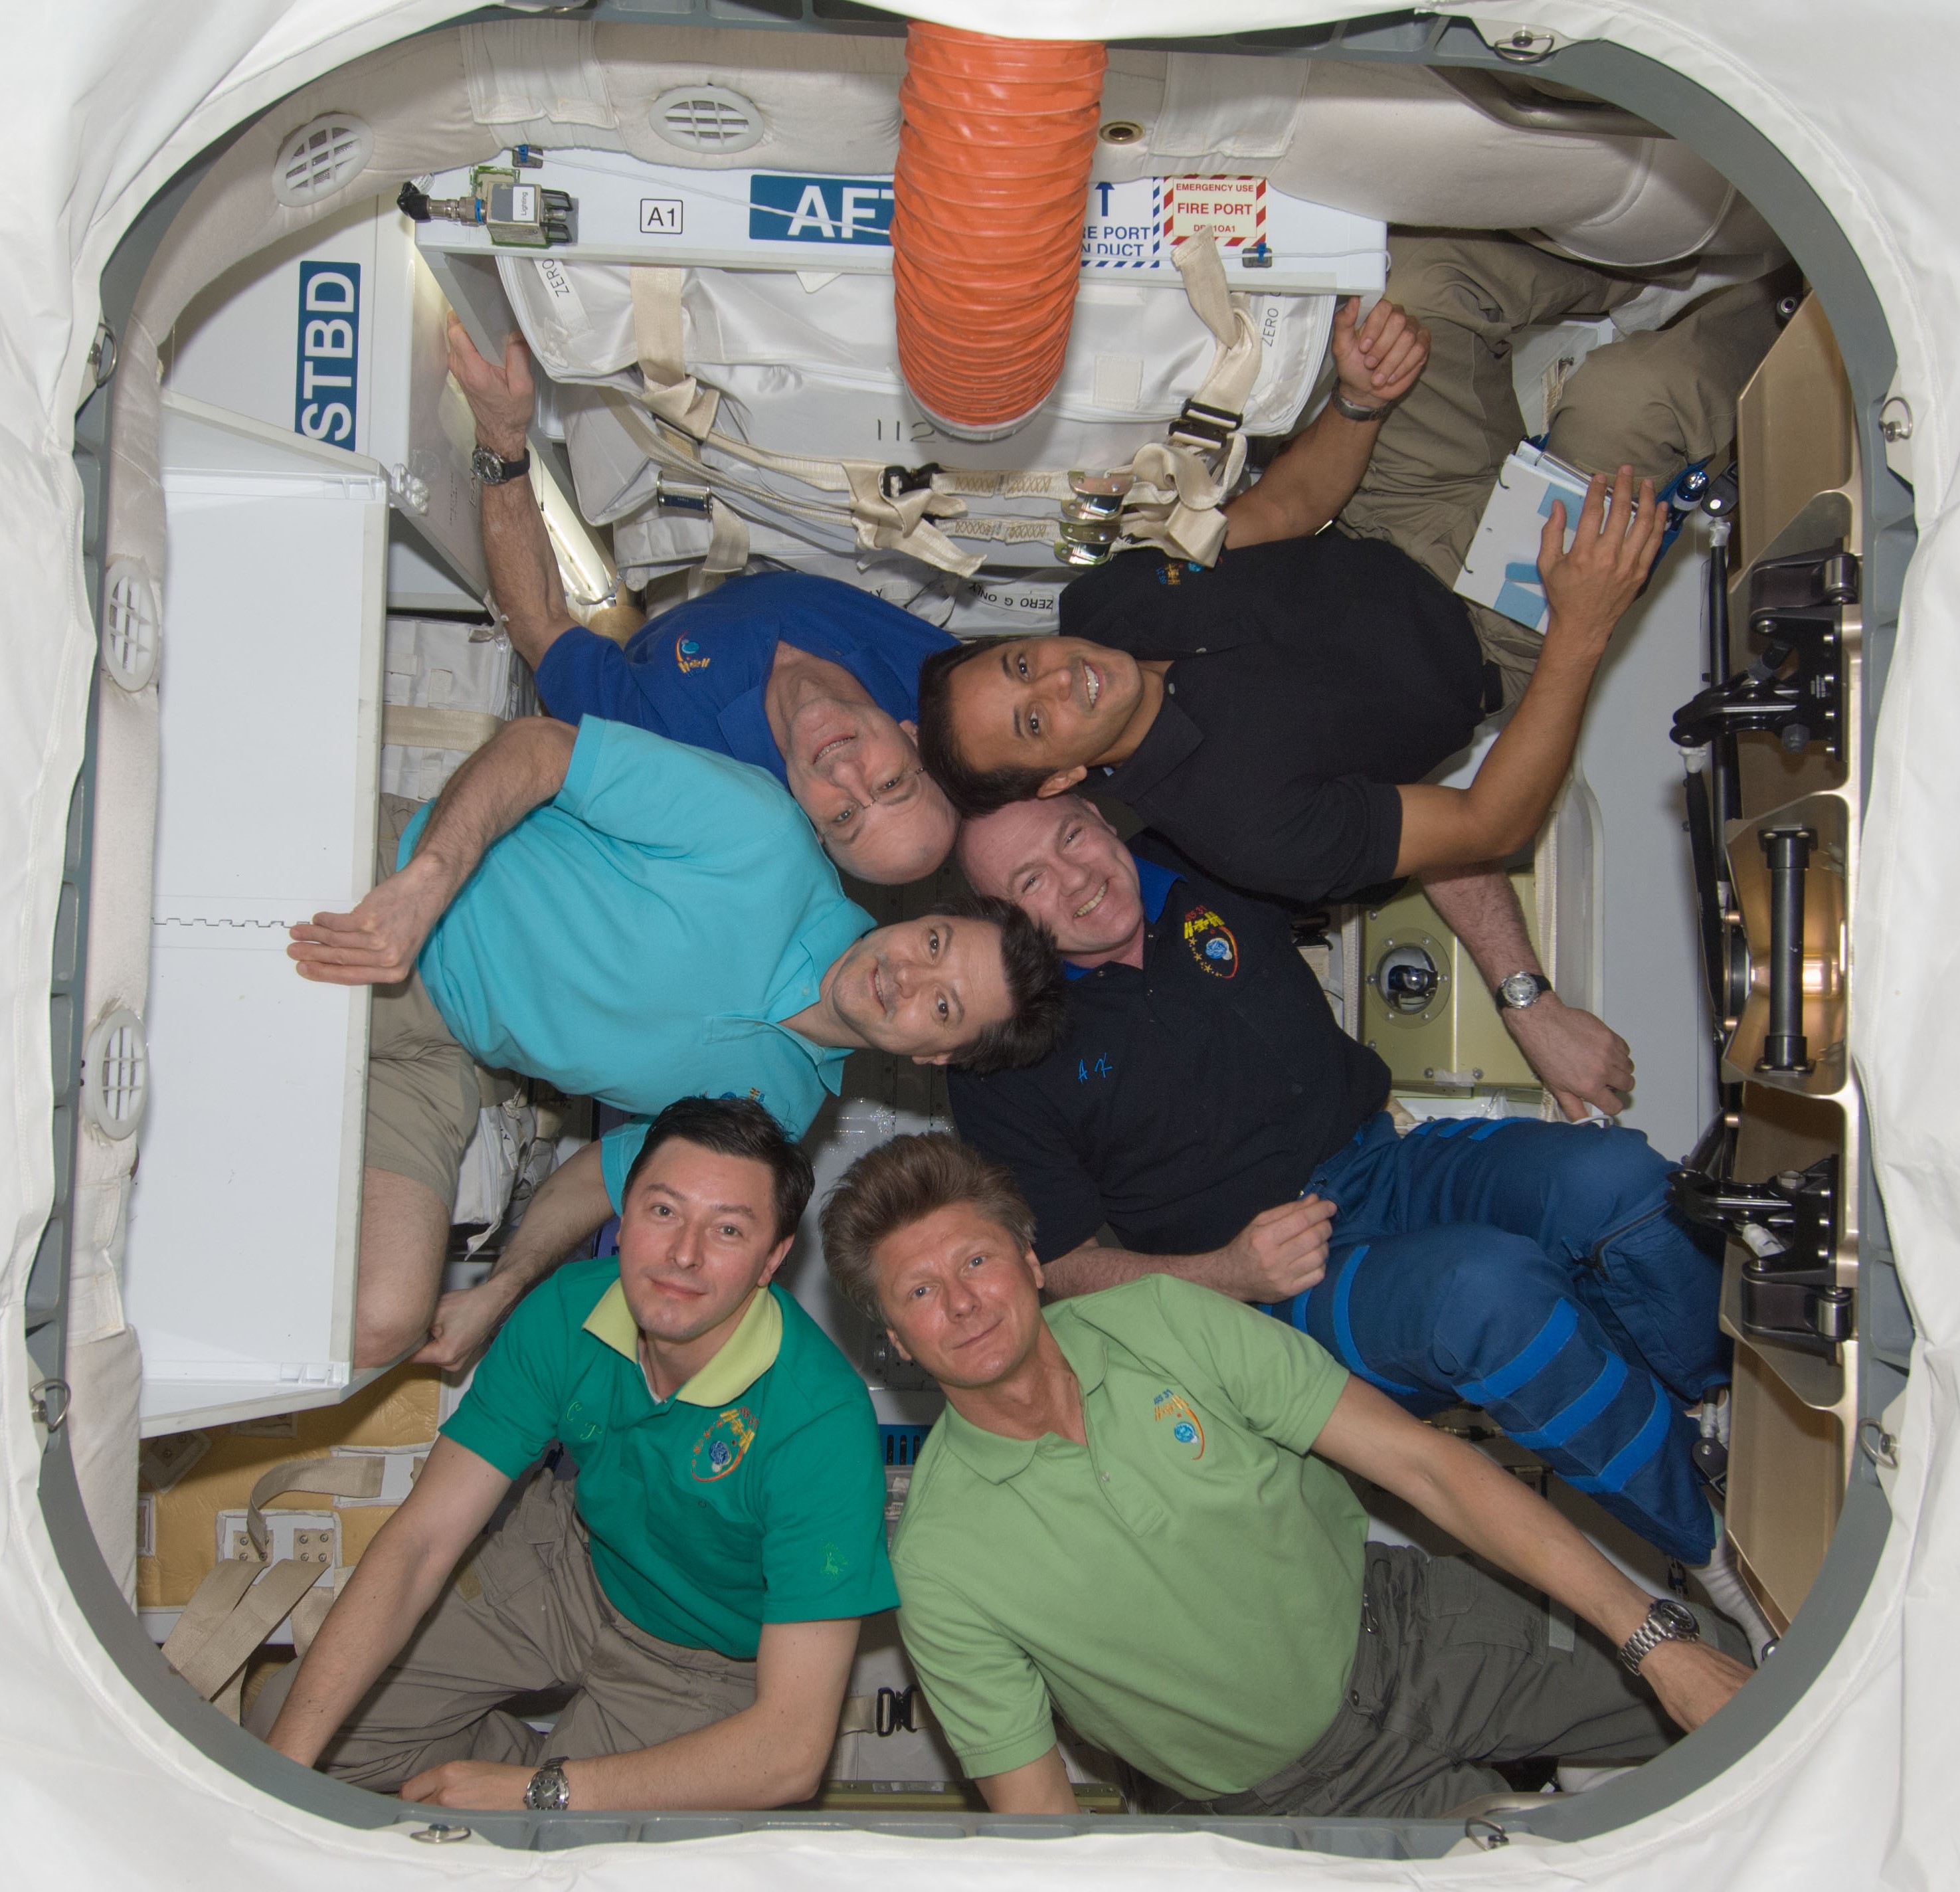 NASA astronaut Joseph M. Acaba with his Expedition 31 crewmates inside the SpaceX Dragon resupply vehicle